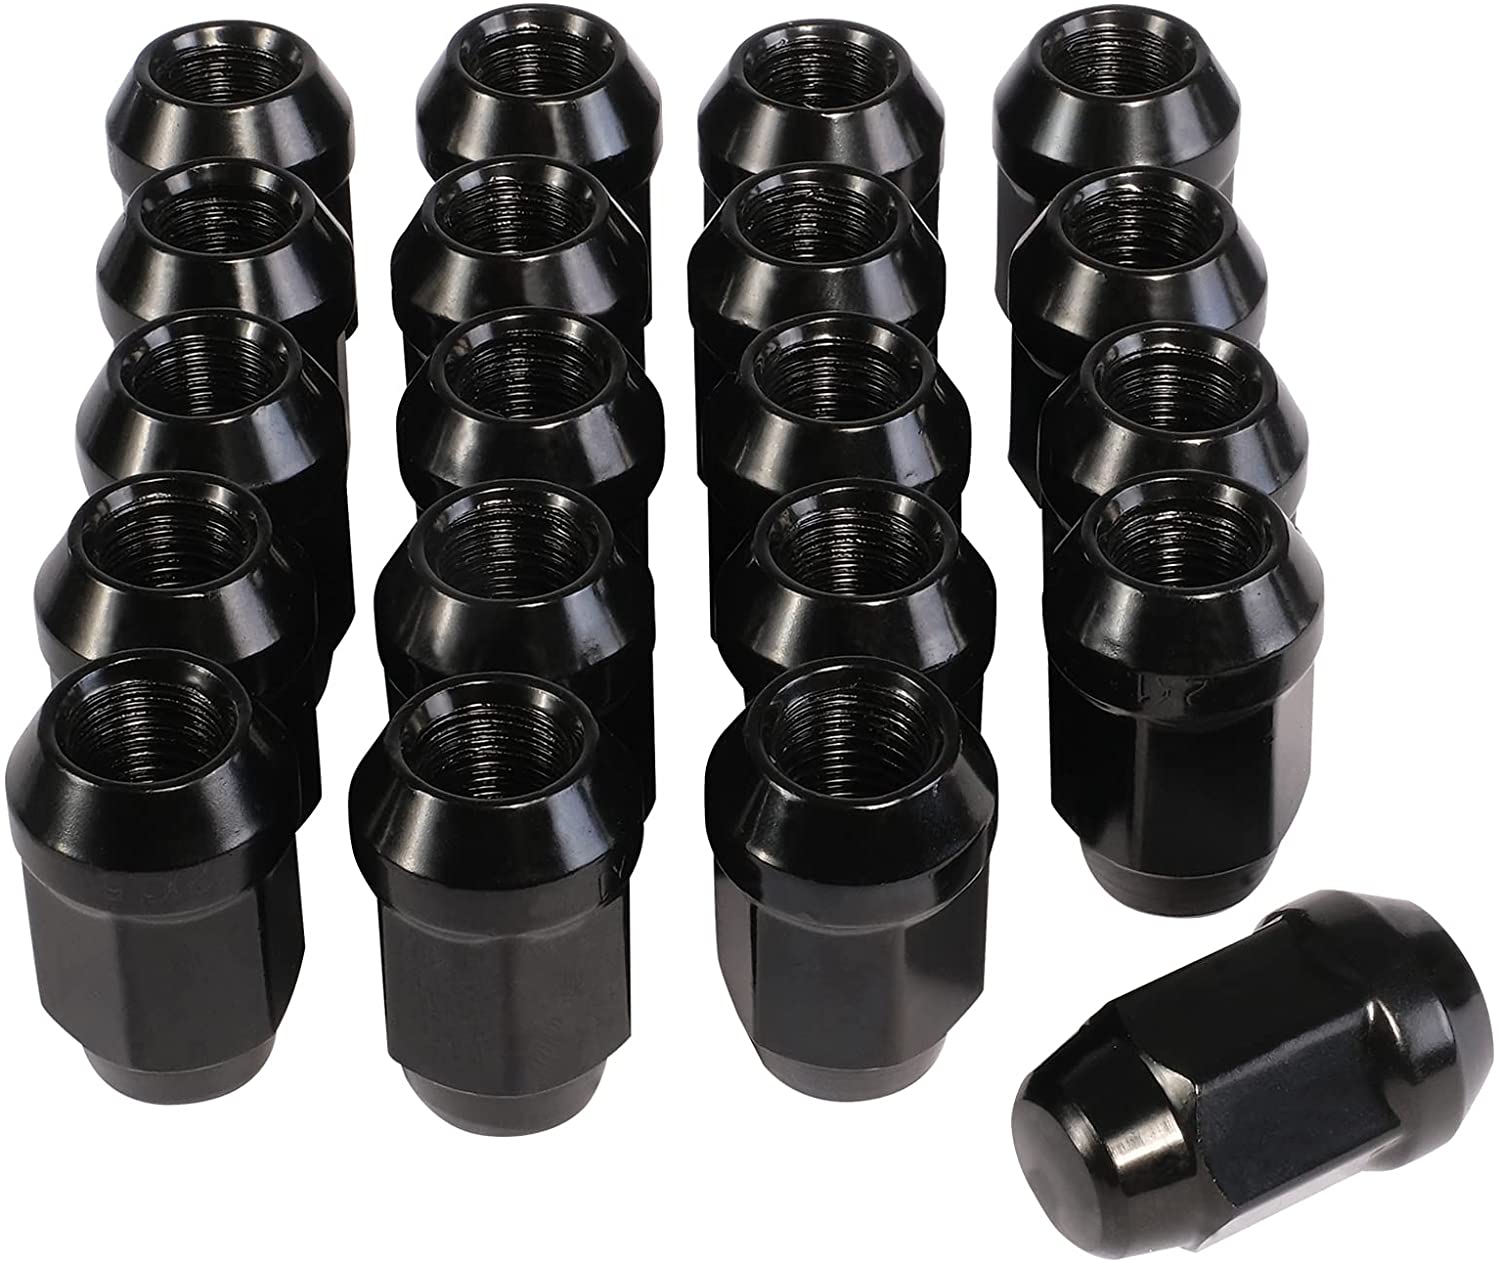 (Out of Stock) Set of 20 M12x1.5 Black Lug Nuts with Cone Seat, for Ford Focus Chevrolet Trailblazer S10 GMC Aftermarket Wheel